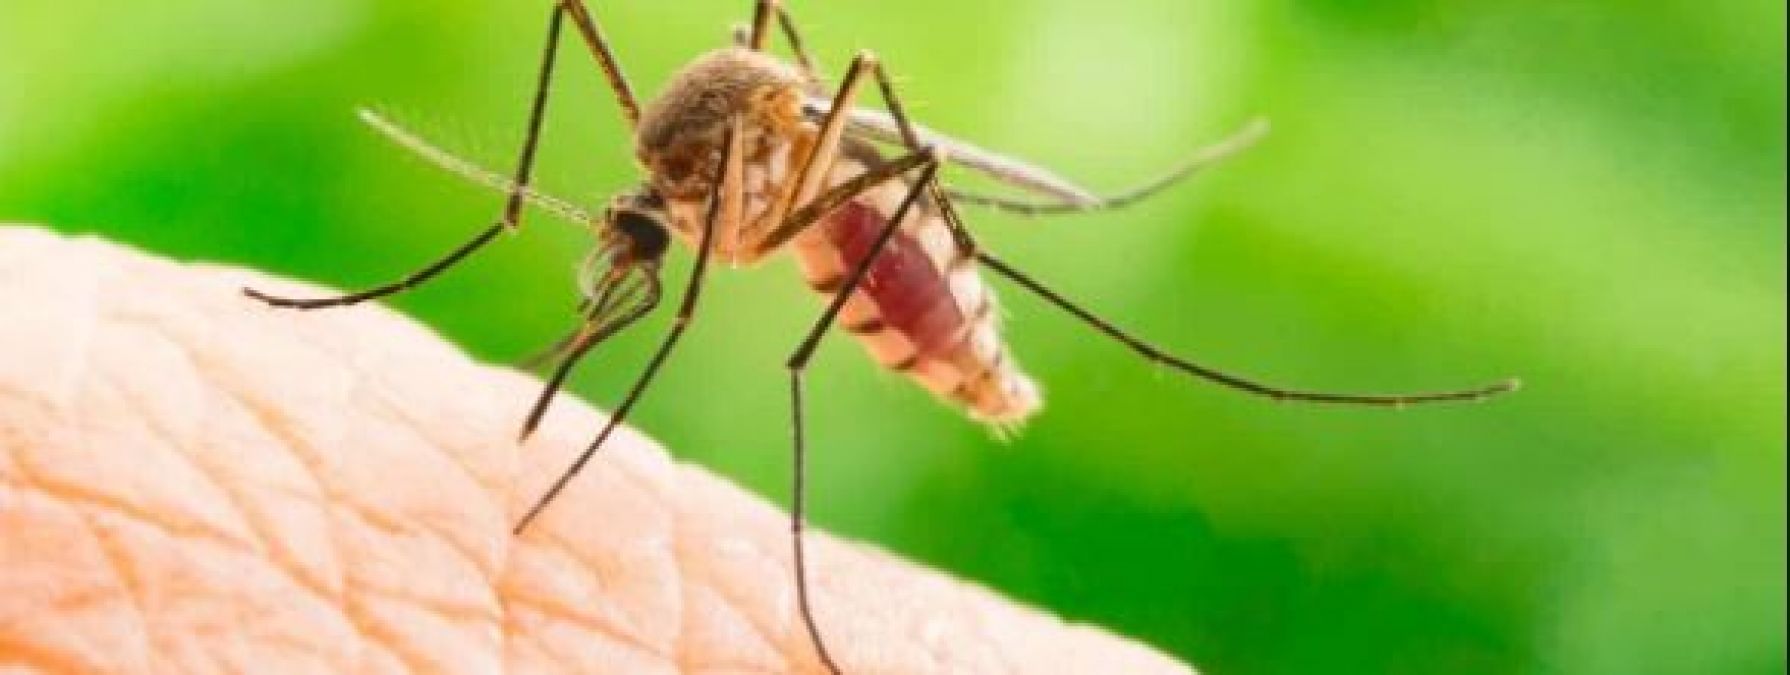 If mosquitoes are bothering you, then some home remedies can get rid of mosquitoes